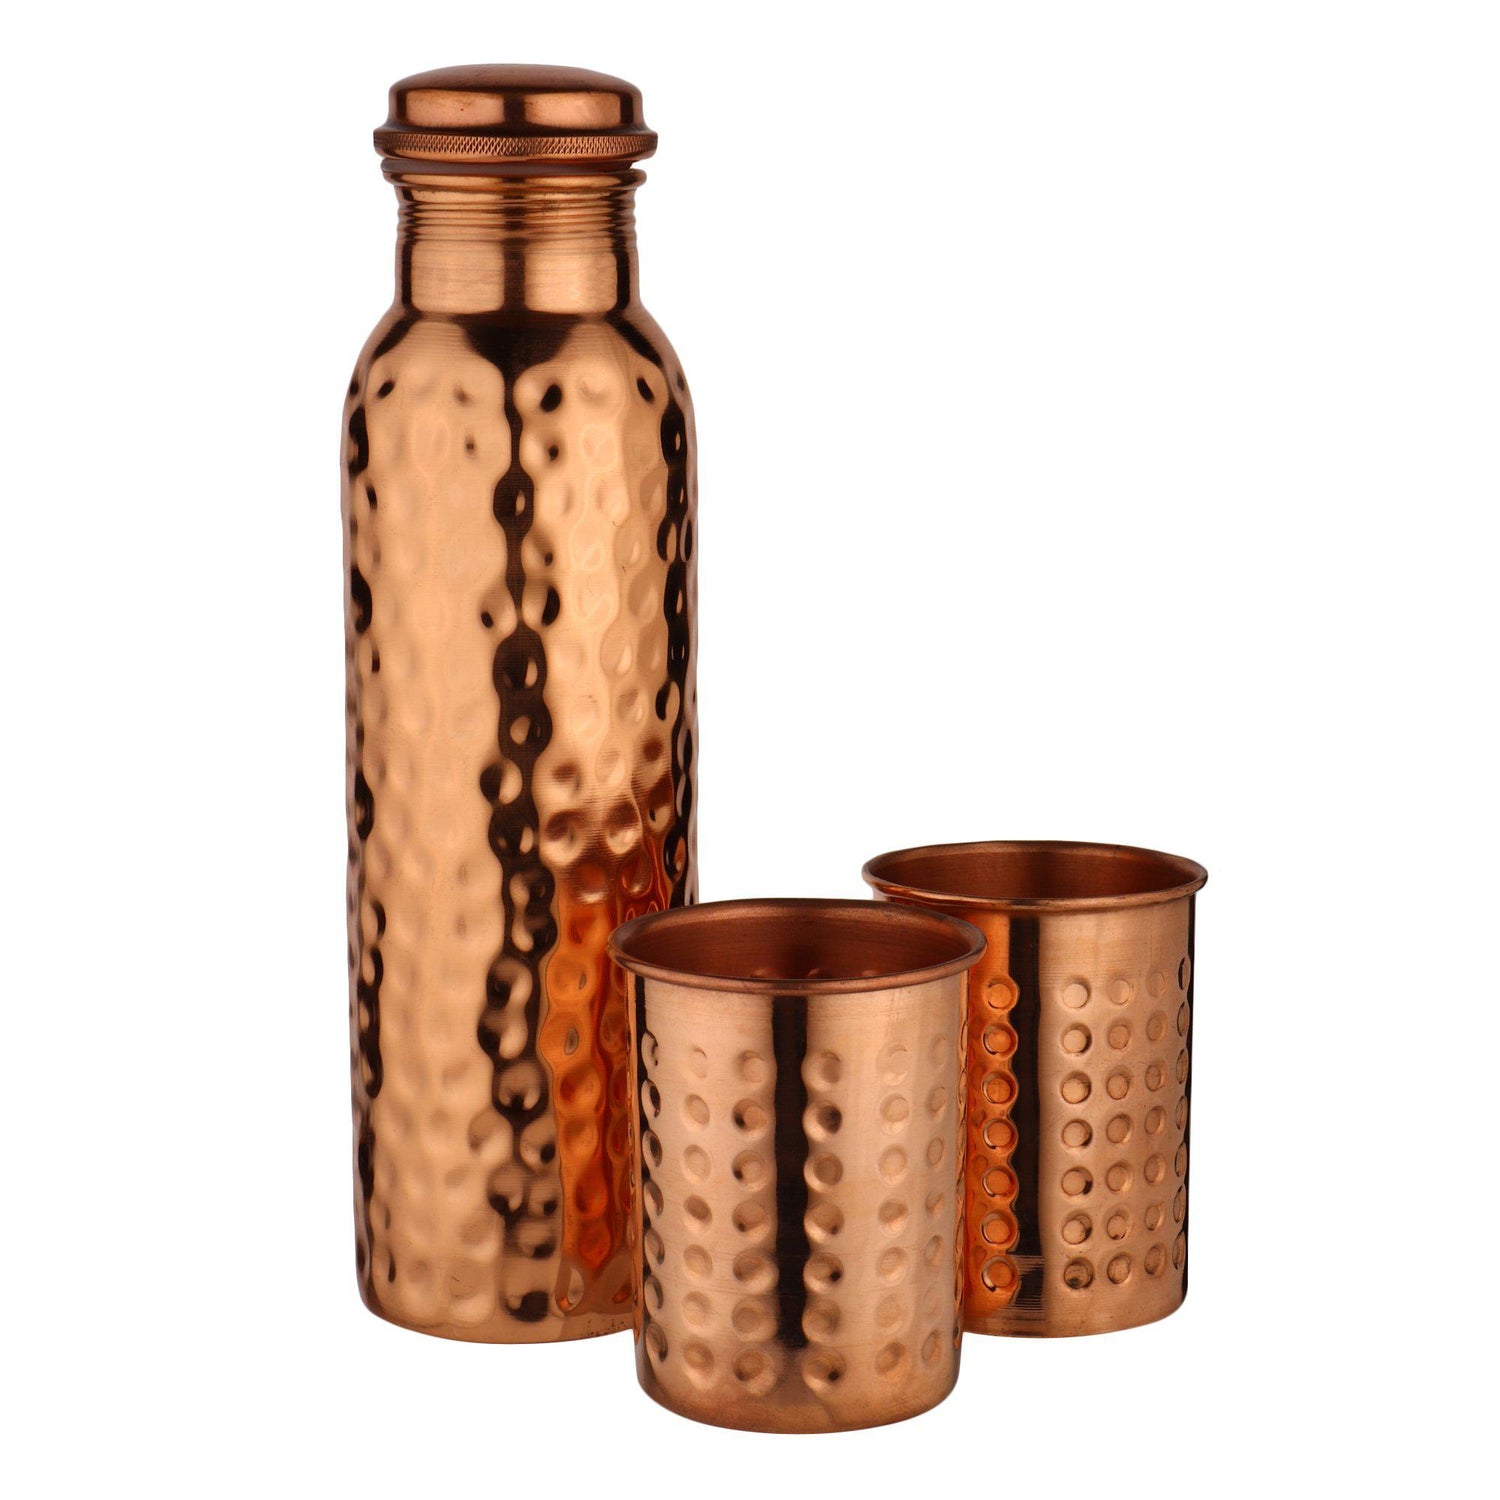 Hammered Style Copper Bottle With Glass-Copper Bottle With Glass-ONESKYSHOP